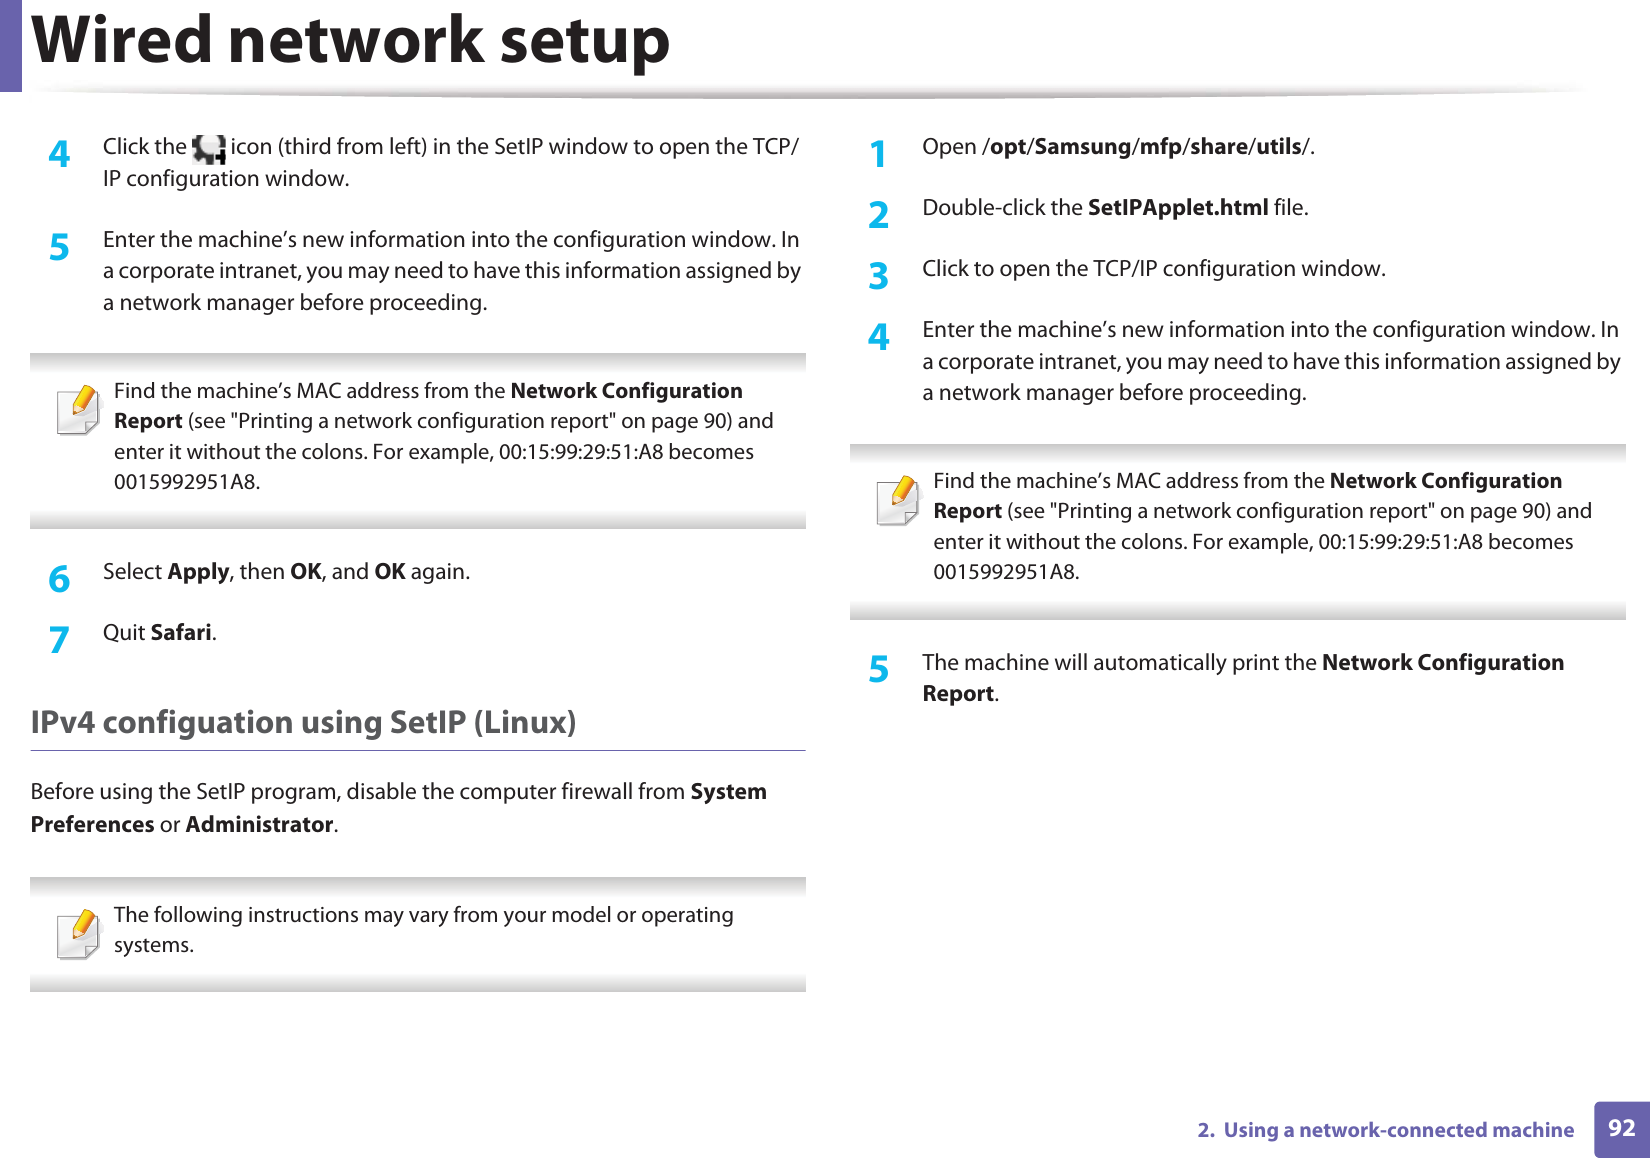 Wired network setup922.  Using a network-connected machine4  Click the   icon (third from left) in the SetIP window to open the TCP/IP configuration window.5  Enter the machine’s new information into the configuration window. In a corporate intranet, you may need to have this information assigned by a network manager before proceeding. Find the machine’s MAC address from the Network Configuration Report (see &quot;Printing a network configuration report&quot; on page 90) and enter it without the colons. For example, 00:15:99:29:51:A8 becomes 0015992951A8. 6  Select Apply, then OK, and OK again.7  Quit Safari.IPv4 configuation using SetIP (Linux)Before using the SetIP program, disable the computer firewall from System Preferences or Administrator. The following instructions may vary from your model or operating systems. 1Open /opt/Samsung/mfp/share/utils/.2  Double-click the SetIPApplet.html file. 3  Click to open the TCP/IP configuration window. 4  Enter the machine’s new information into the configuration window. In a corporate intranet, you may need to have this information assigned by a network manager before proceeding. Find the machine’s MAC address from the Network Configuration Report (see &quot;Printing a network configuration report&quot; on page 90) and enter it without the colons. For example, 00:15:99:29:51:A8 becomes 0015992951A8. 5  The machine will automatically print the Network Configuration Report. 